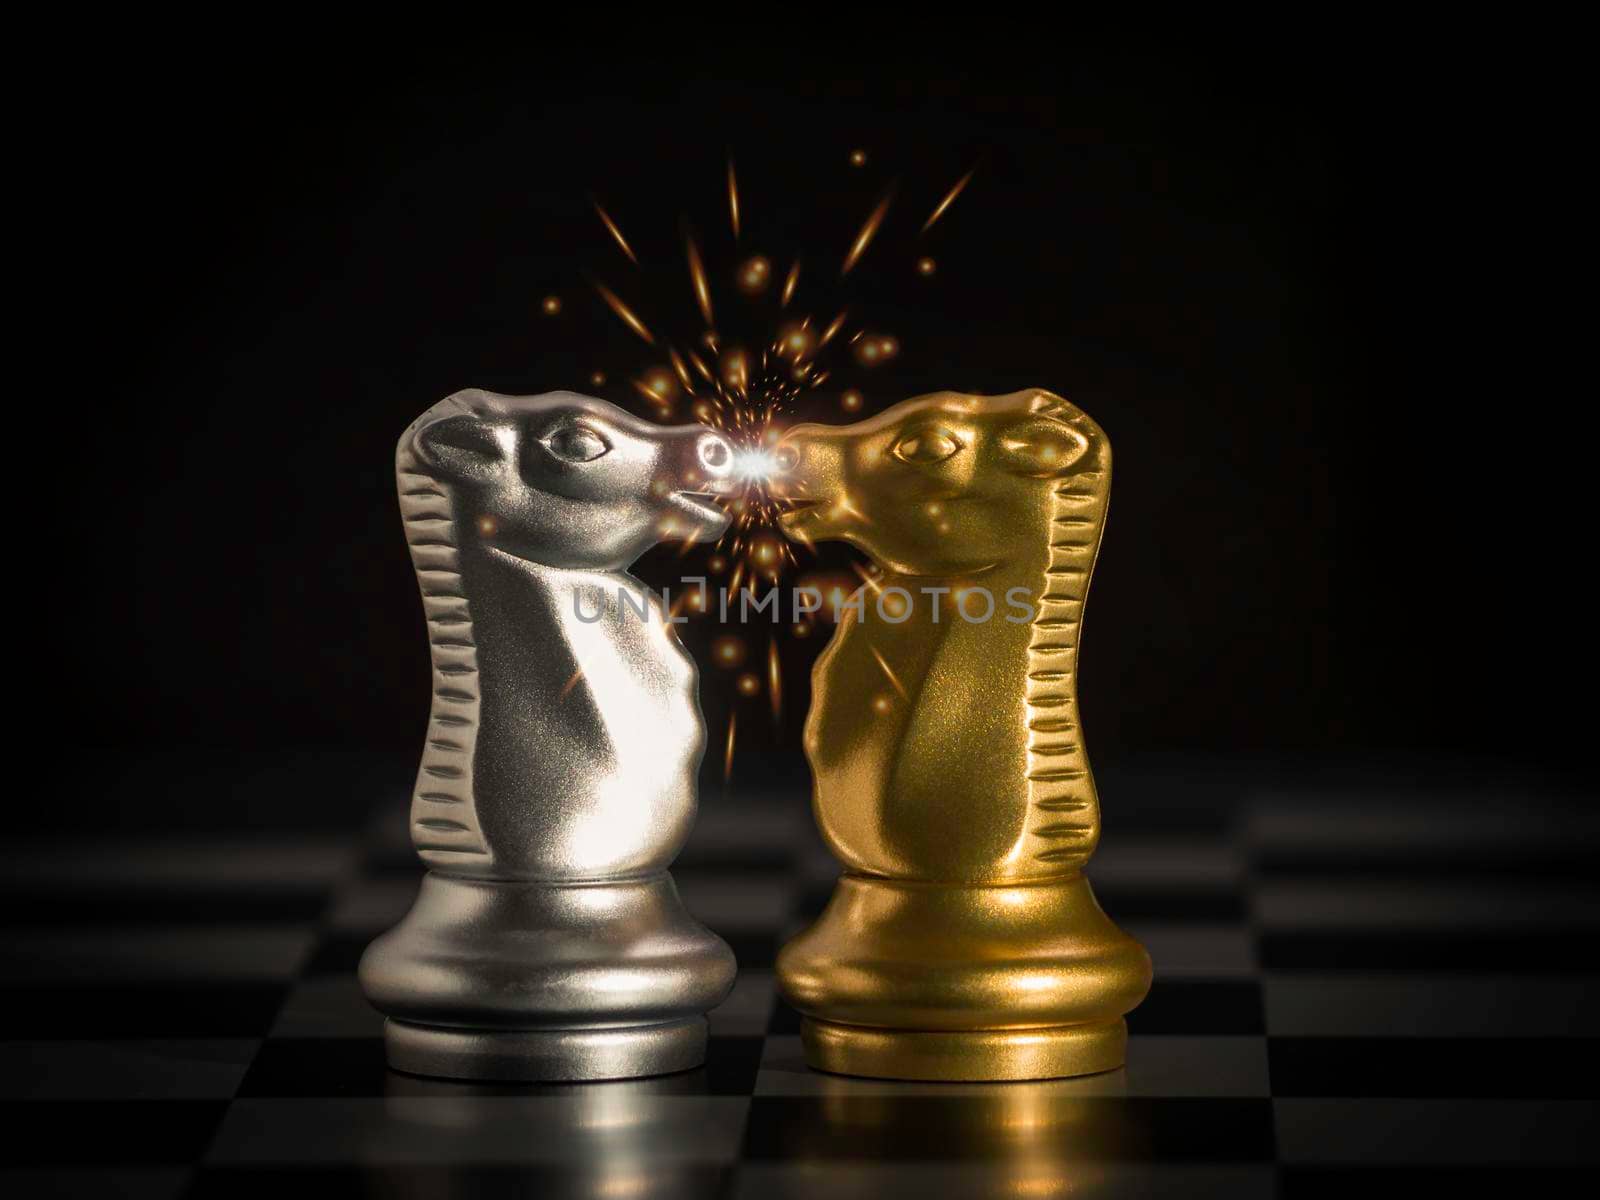 Gold knight chess facing silver knight chess with red hot flying sparks fire on chess board. Business leader market target strategy. business competition success, strategy ideas.